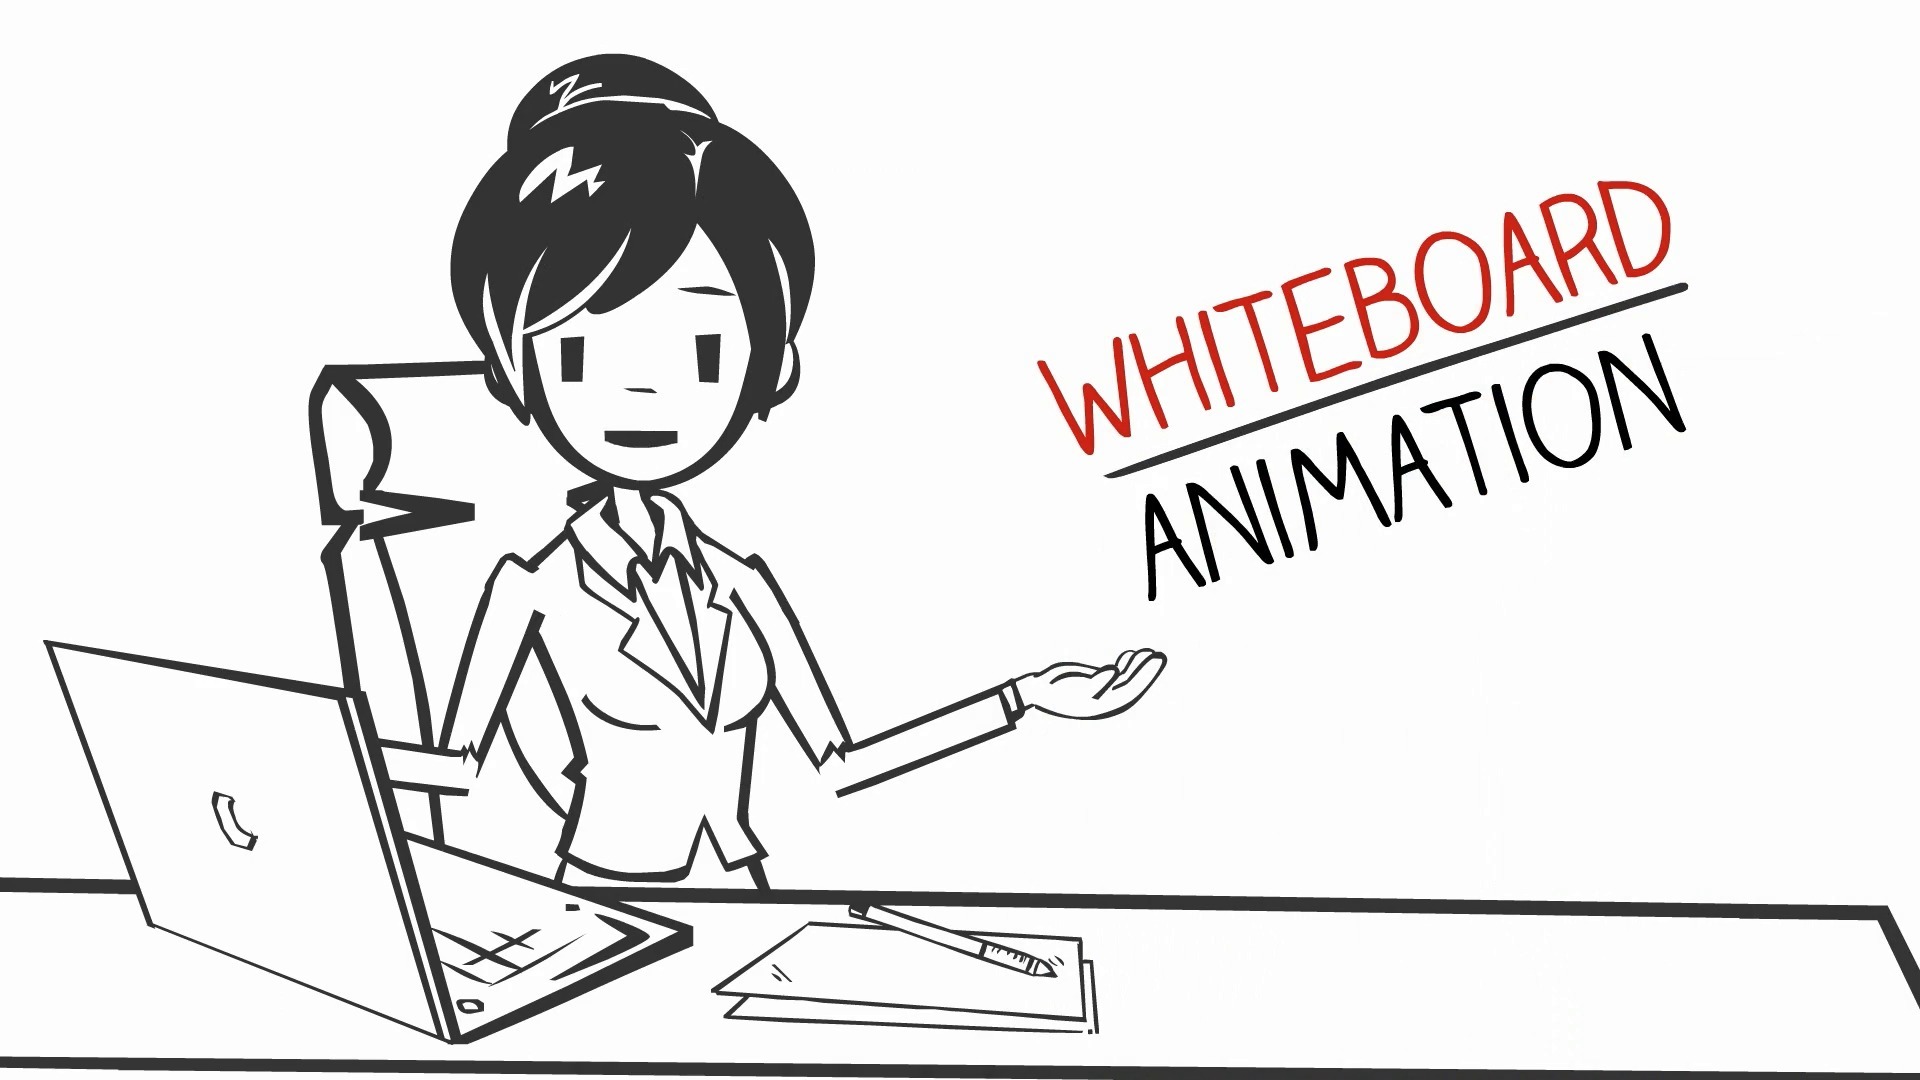 Whiteboard Animation in the Healthcare Industry